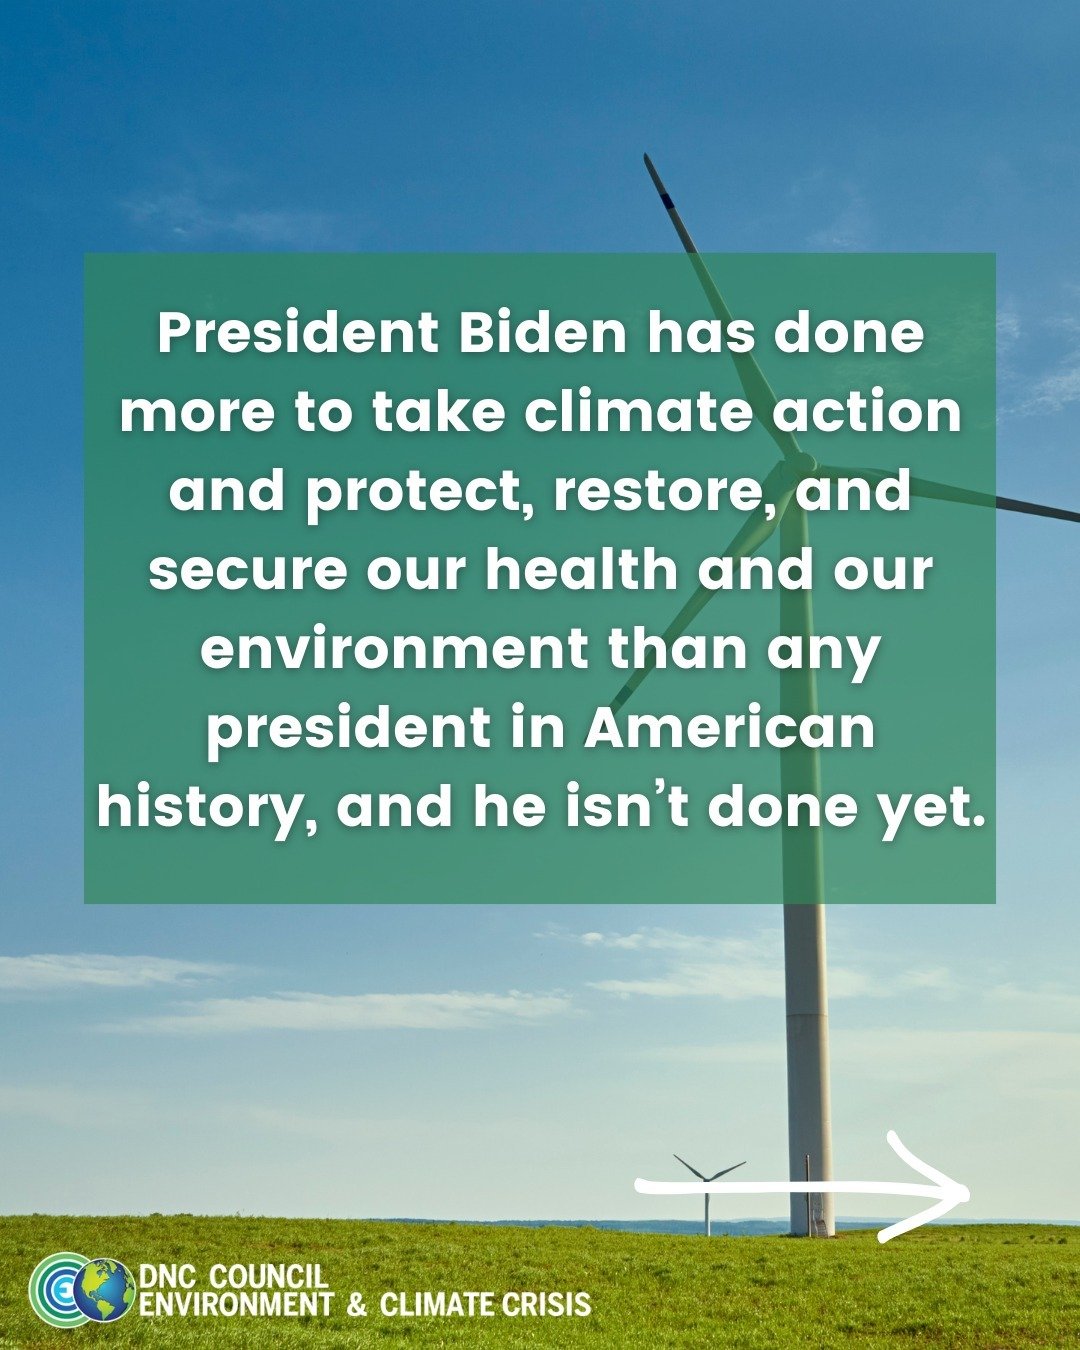 Since day 1 of his presidency, Joe Biden has taken more than 300 climate, conservation, public health and clean energy actions, more than any other president in history!

We&rsquo;re breaking down the biggest highlights in major areas. First up, JOBS